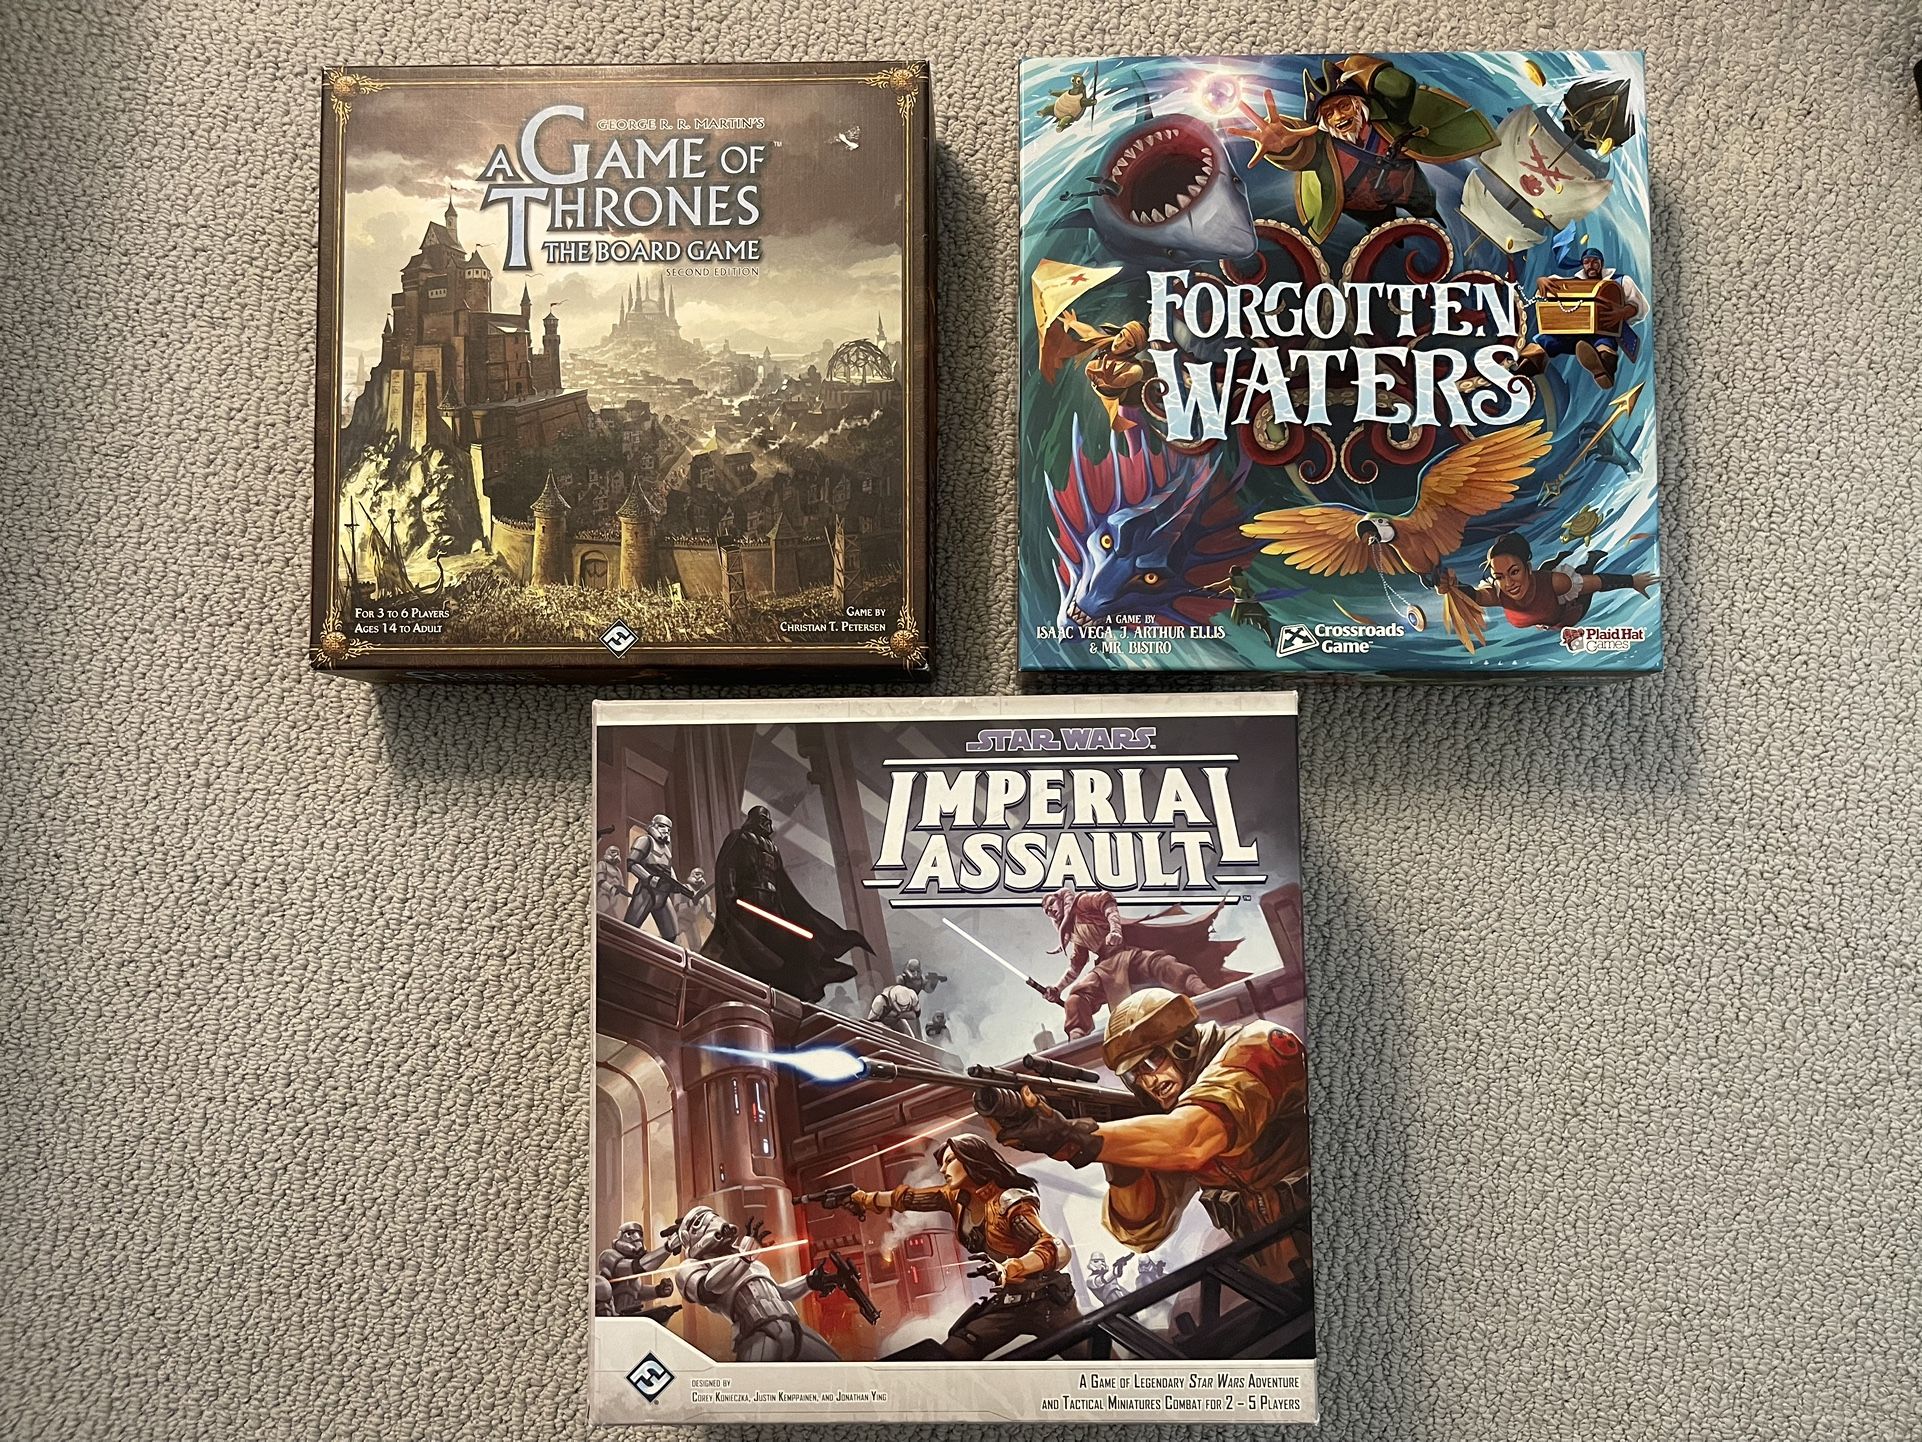 Board Games (Forgotten Waters, Star Wars Imperial Assault, Game Of Thrones)